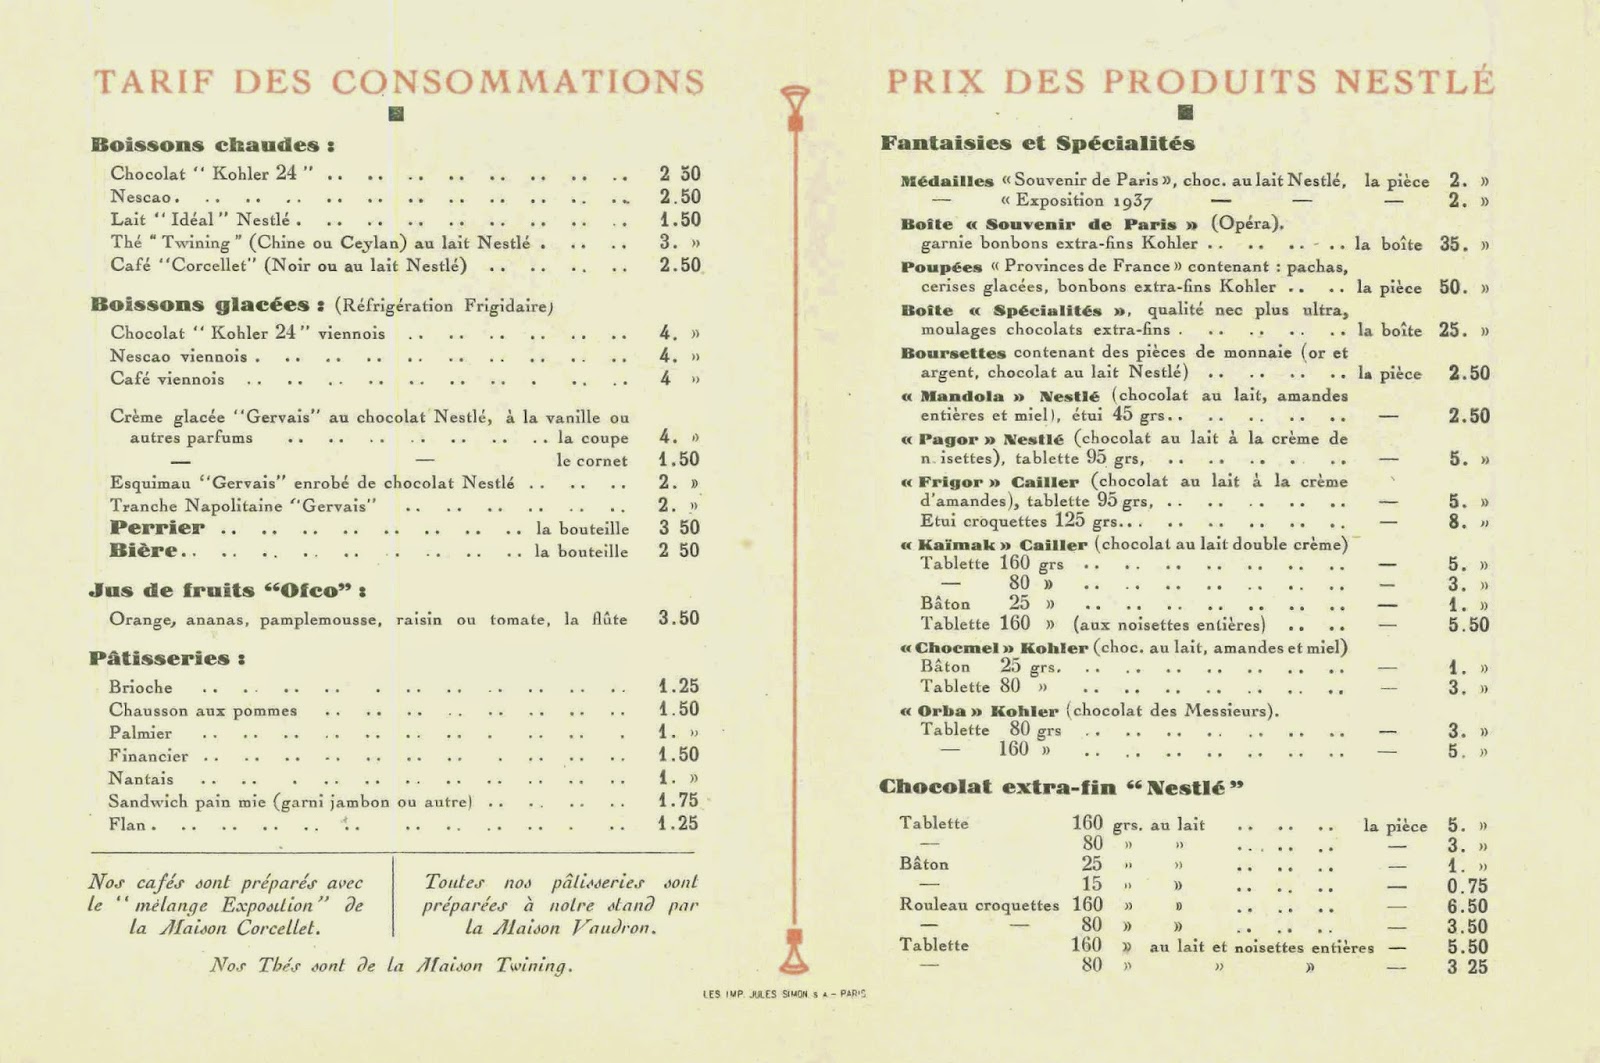 The pamphlet interior.